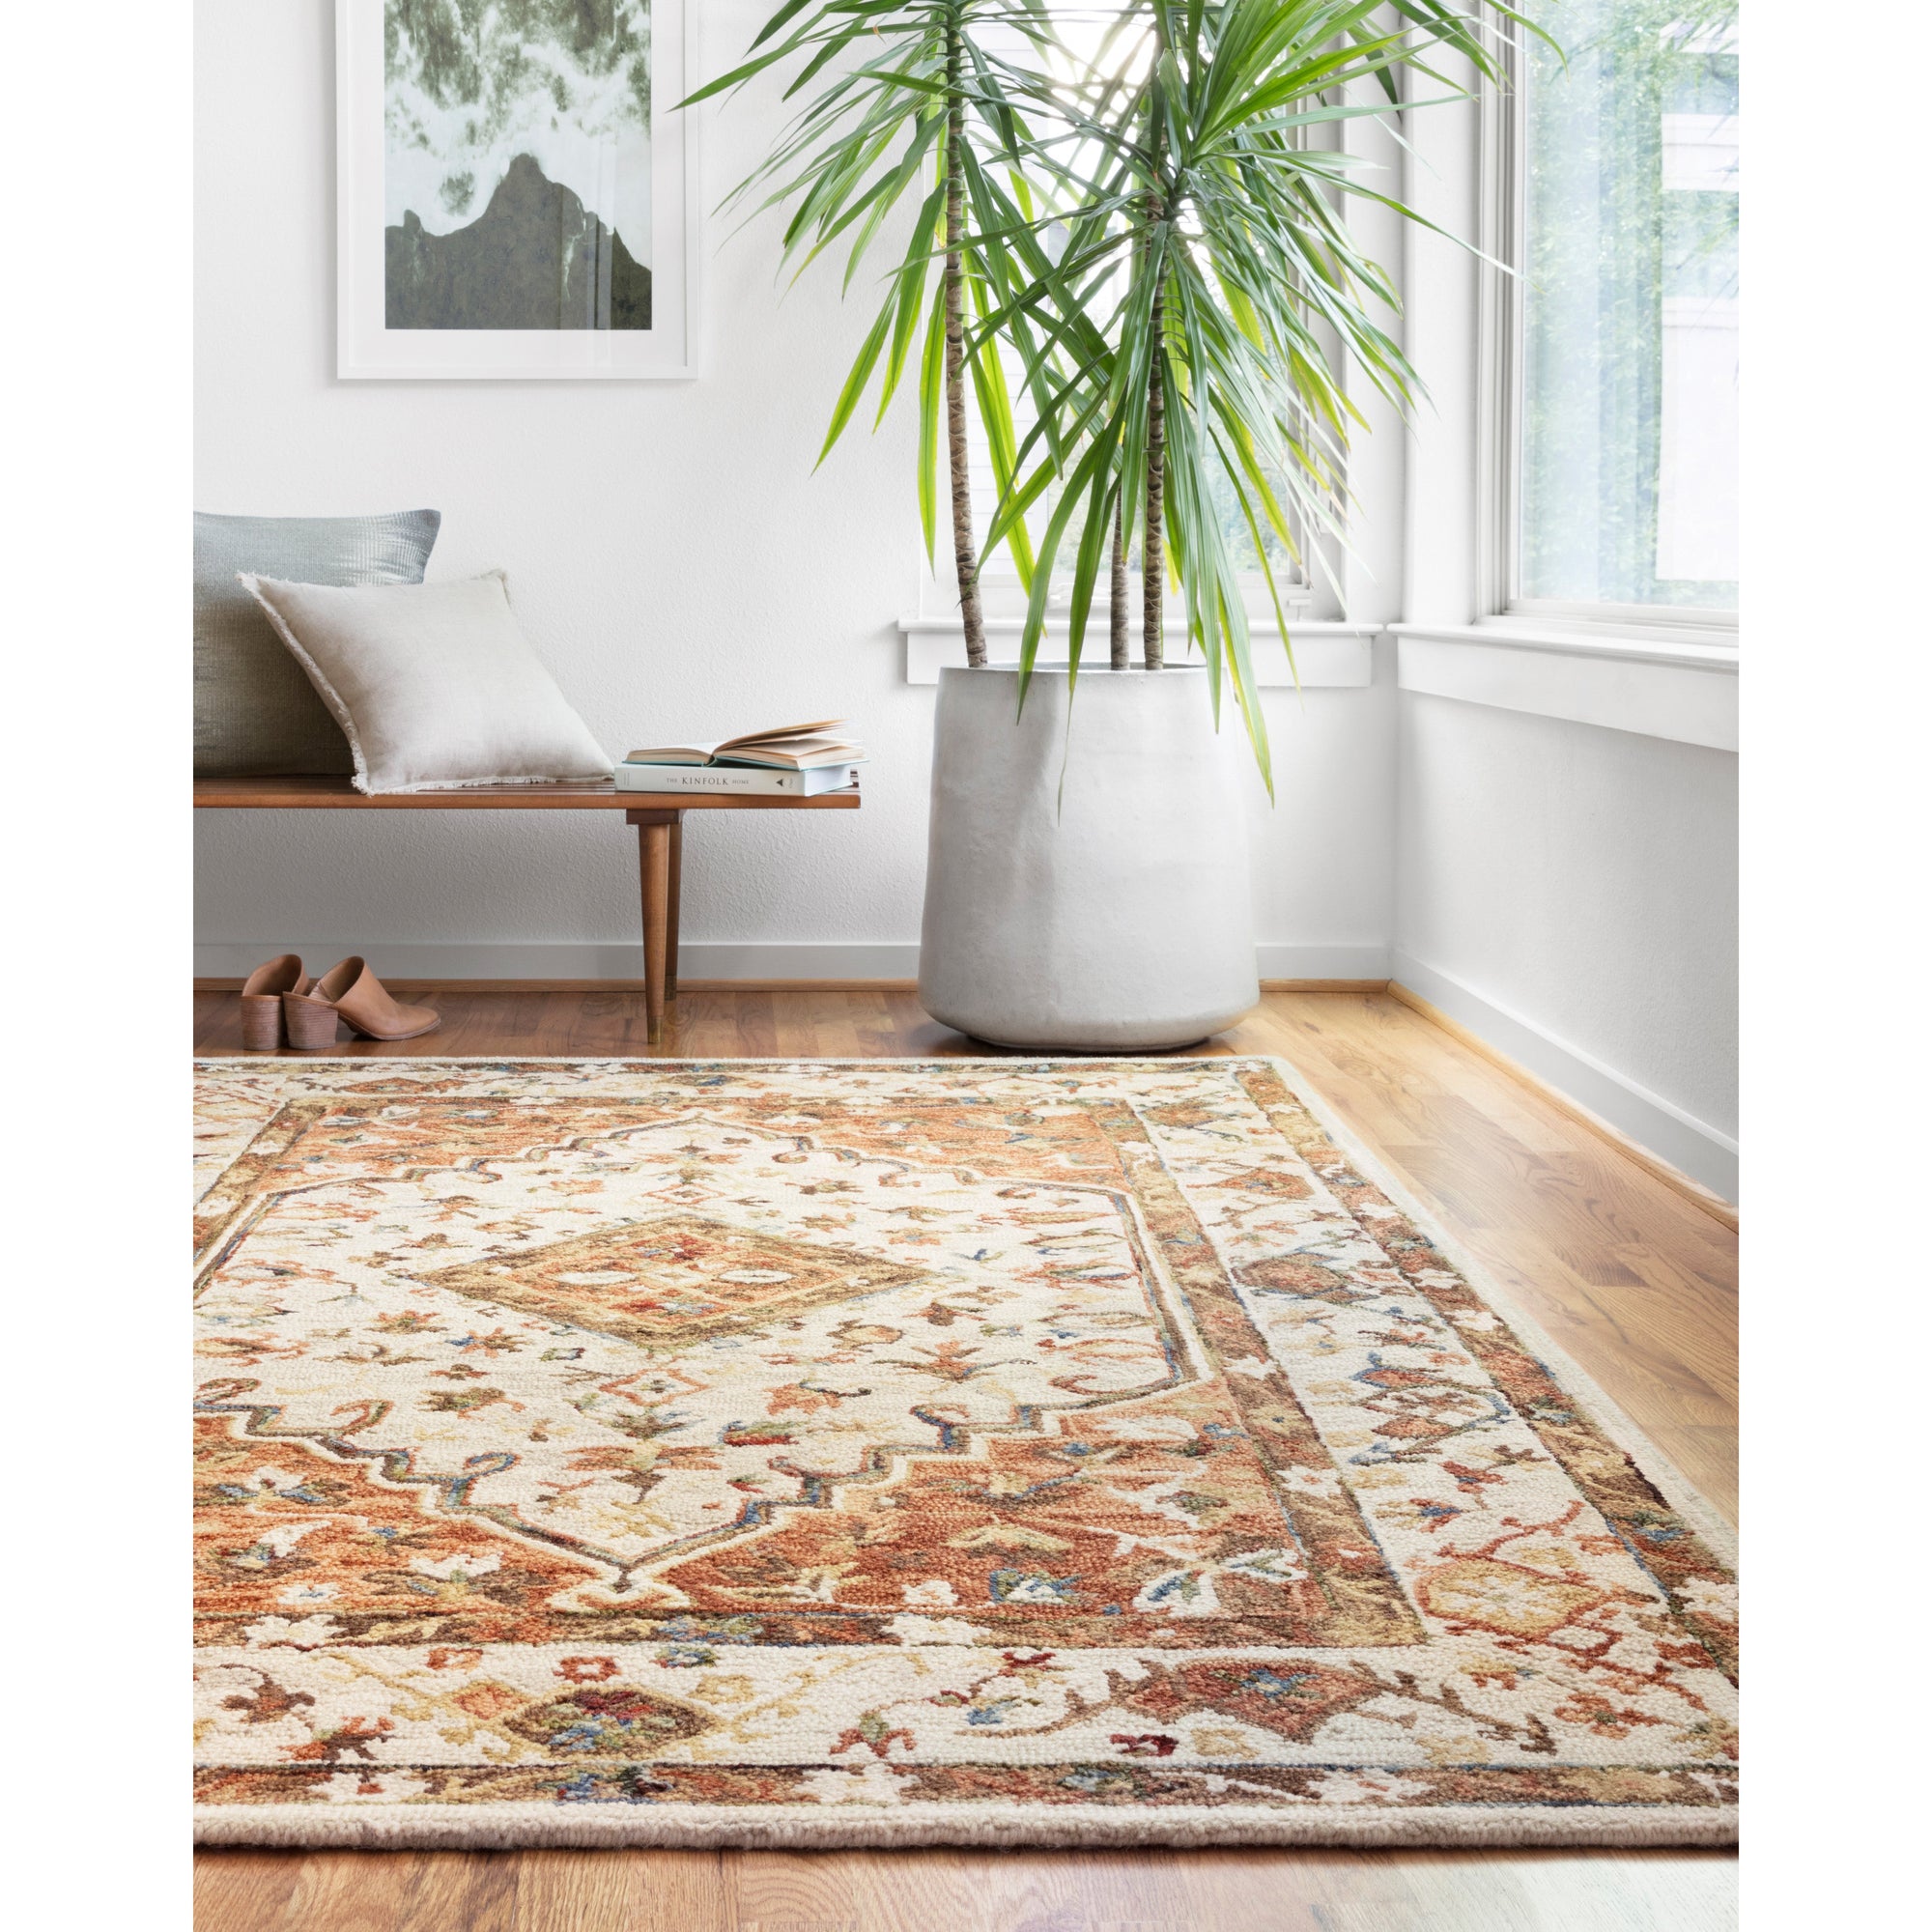 Rugs by Roo Loloi Beatty Ivory Rust Area Rug in size 18" x 18" Sample